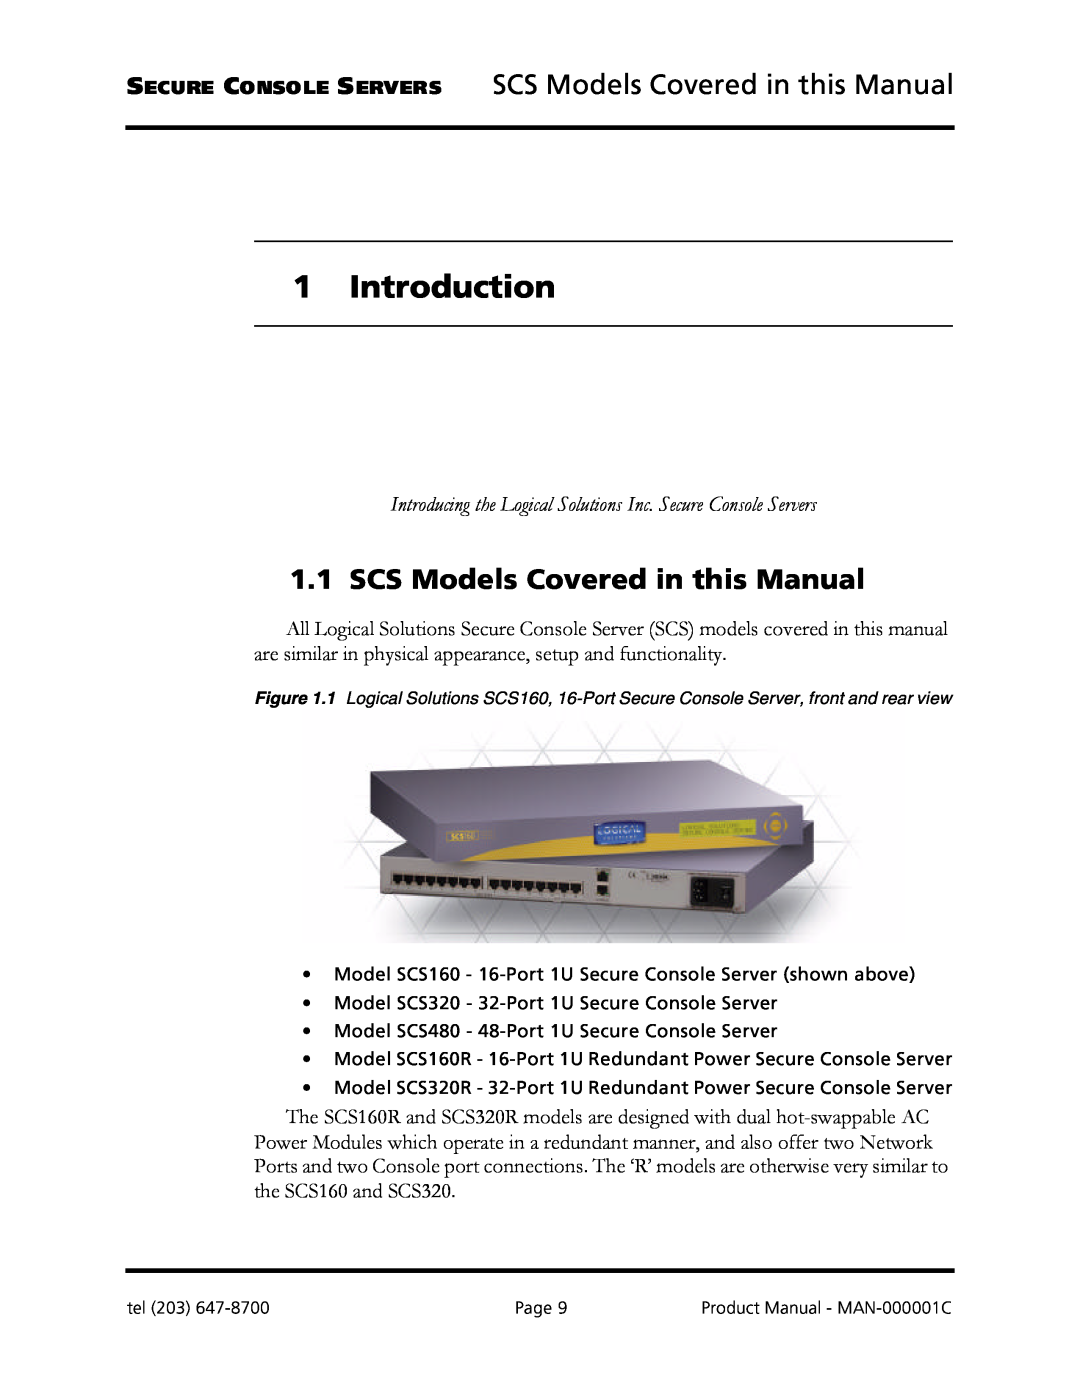 Logical Solutions SCS-R manual Introduction, SECURE CONSOLE SERVERS SCS Models Covered in this Manual 